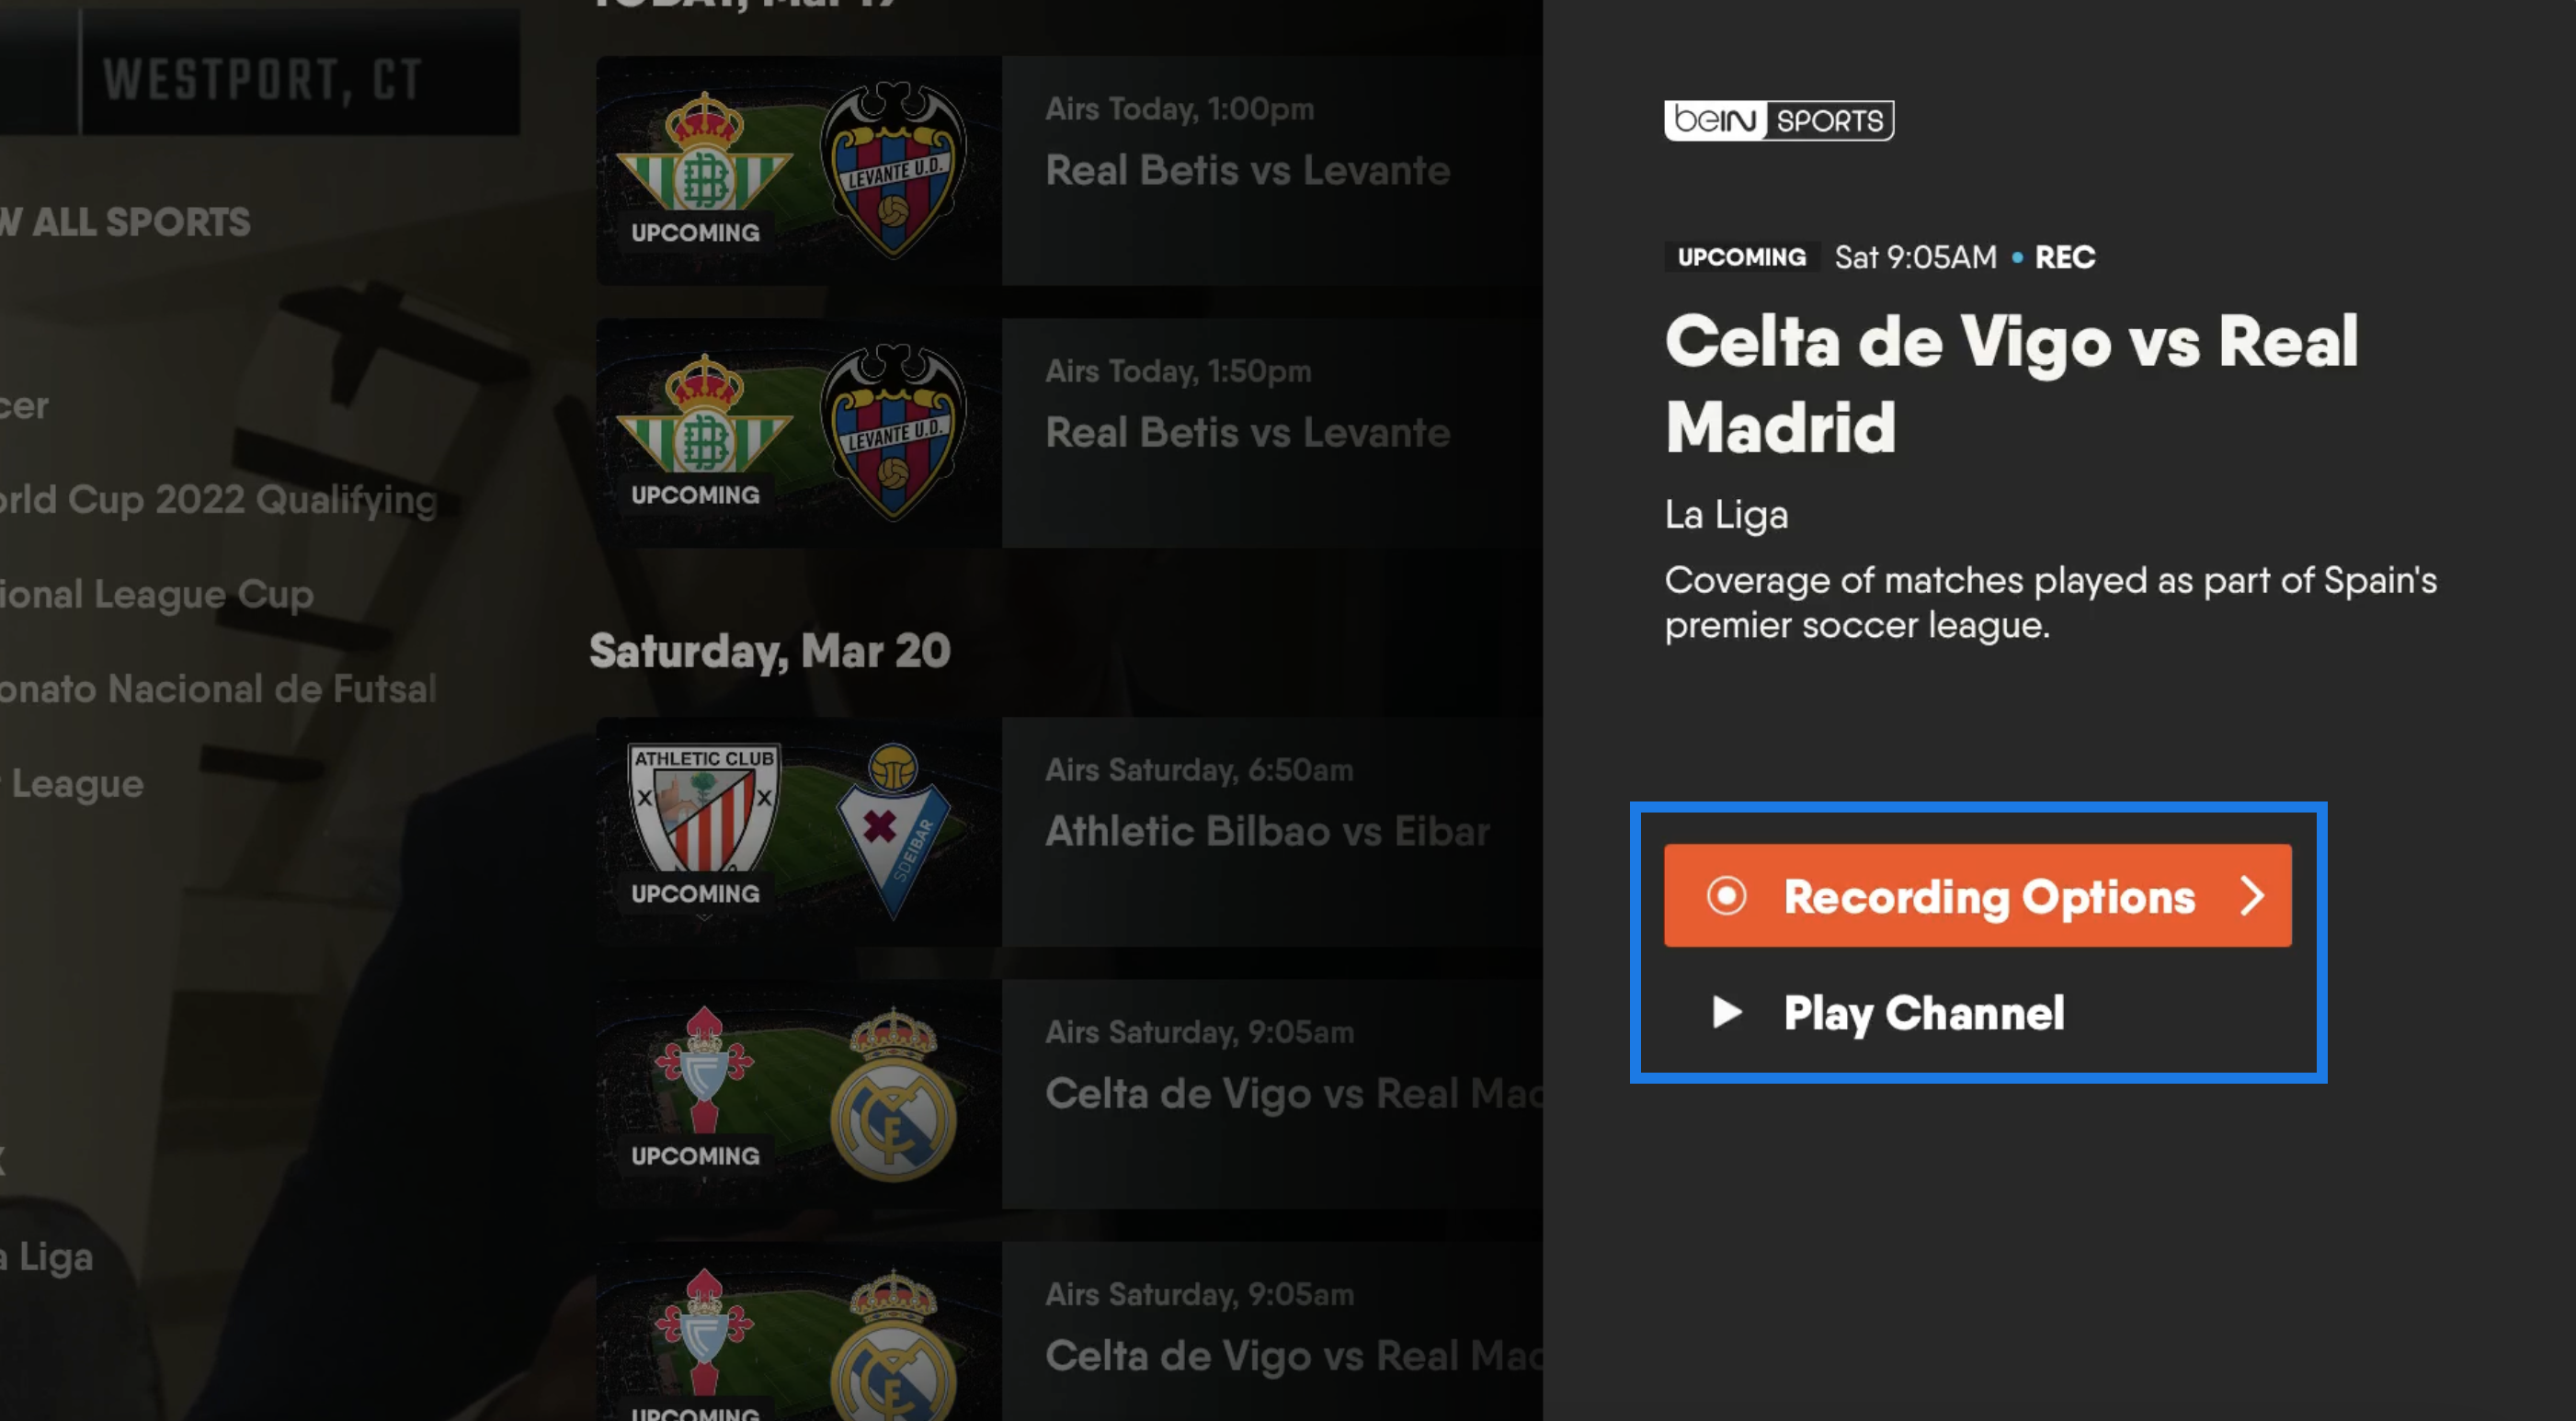 Program information screen for an upcoming soccer match on the FuboTV app for Apple TV with RECORDING OPTIONS highlighted